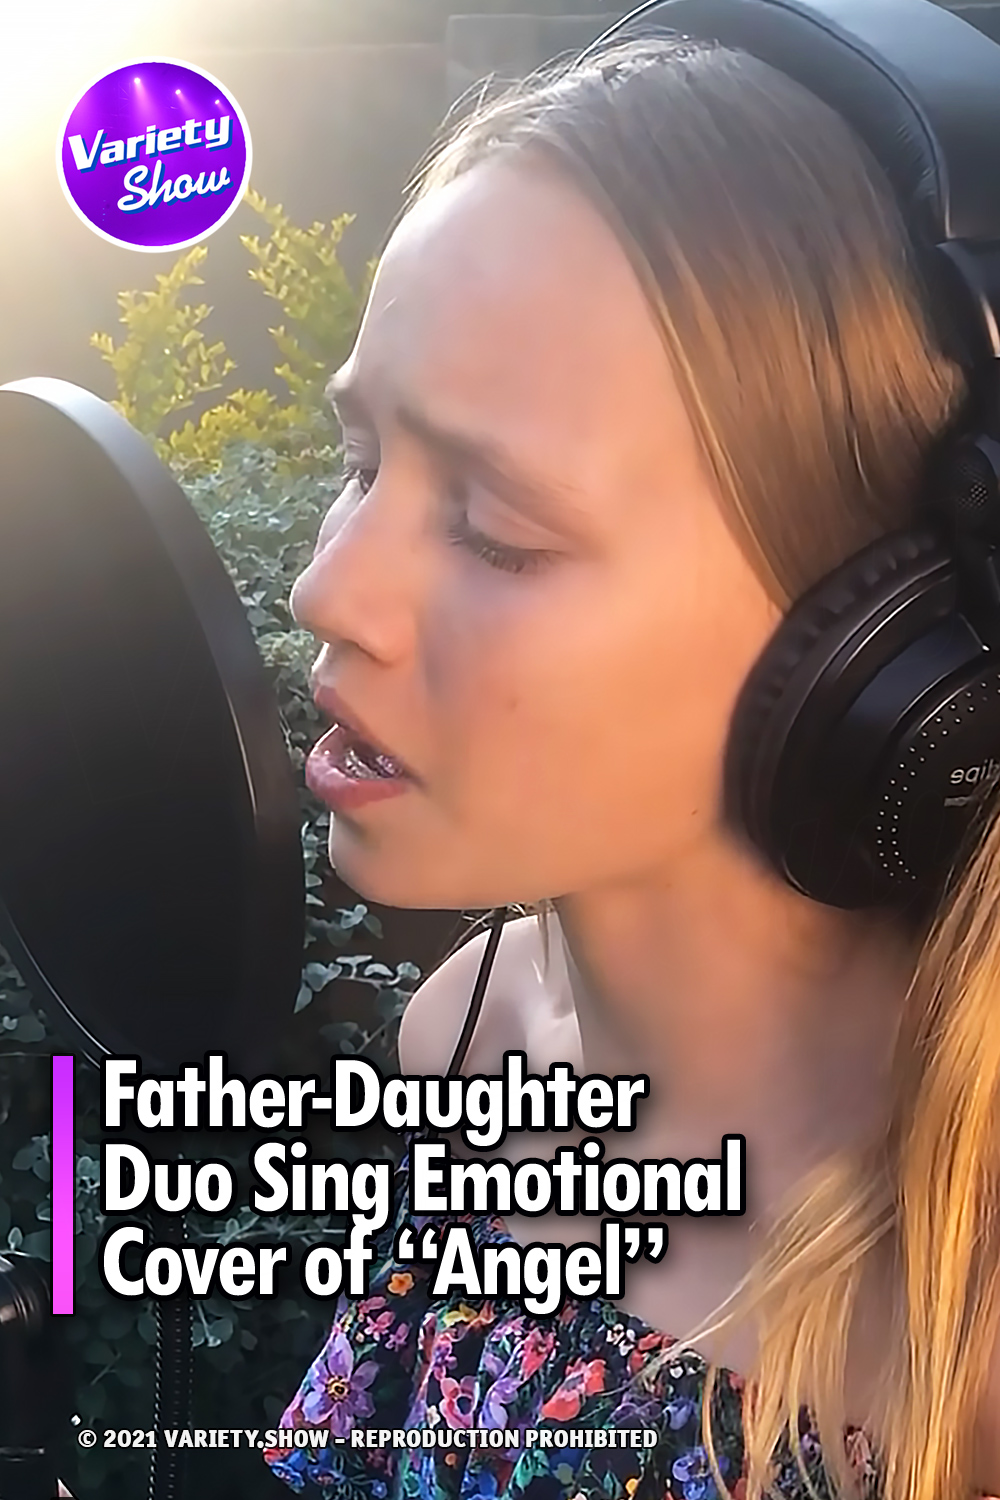 Father-Daughter Duo Sing Emotional Cover of “Angel”